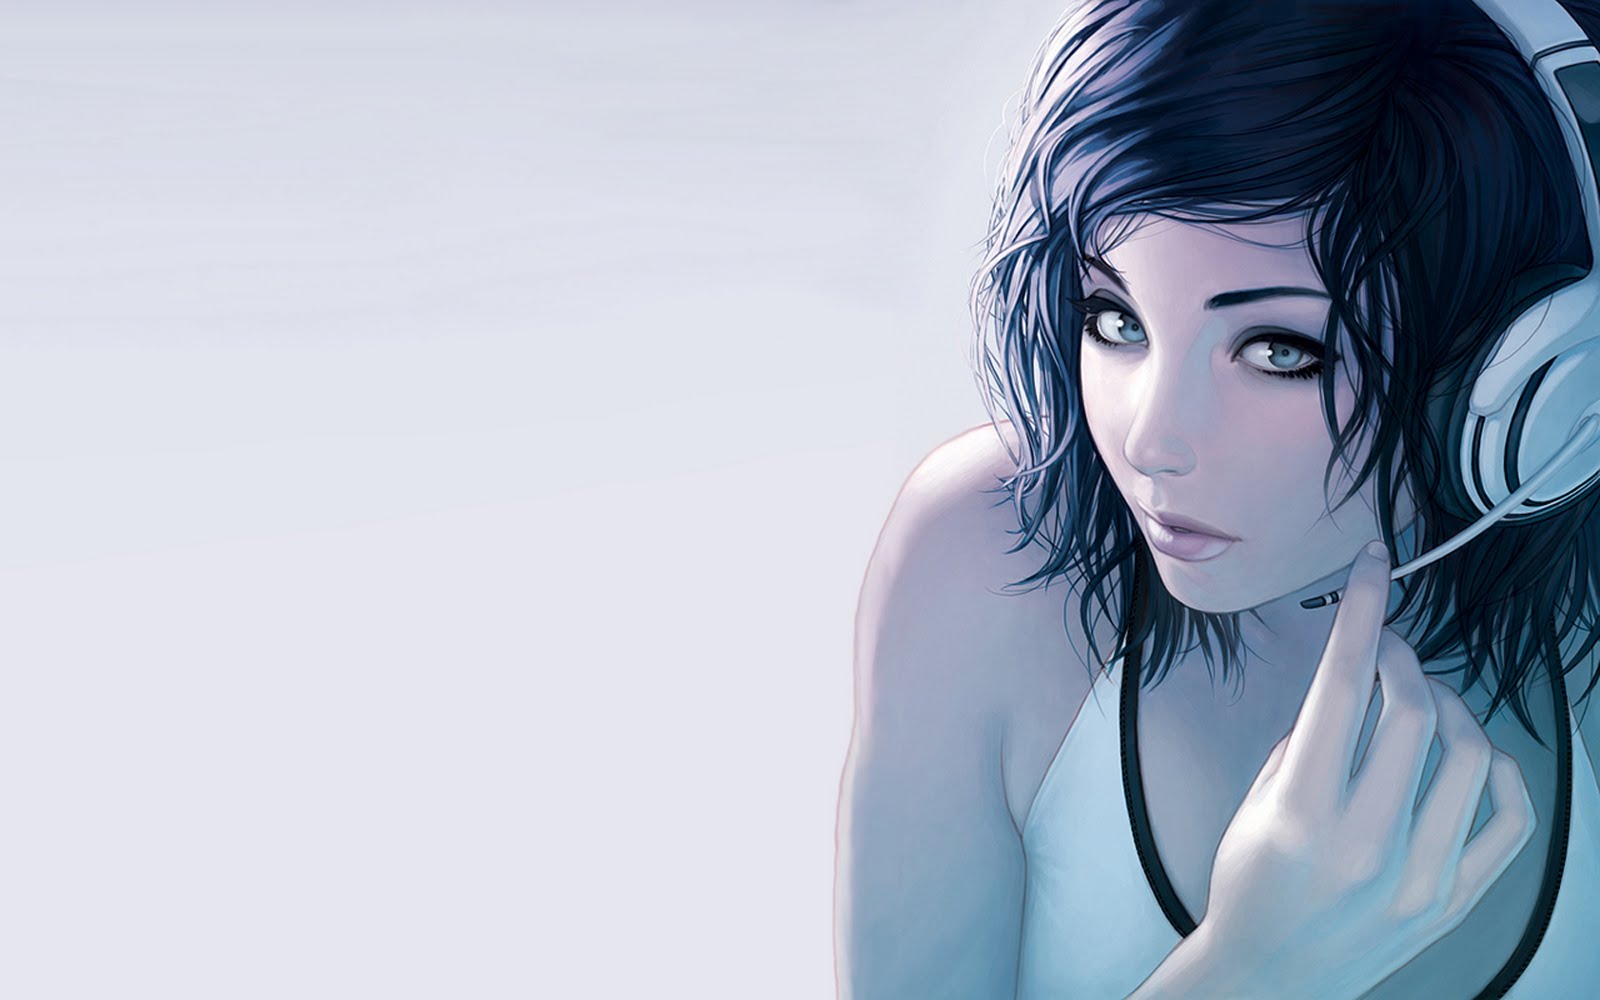 TO Download 3D Girl With Headphone wallpaper click on full size and then 